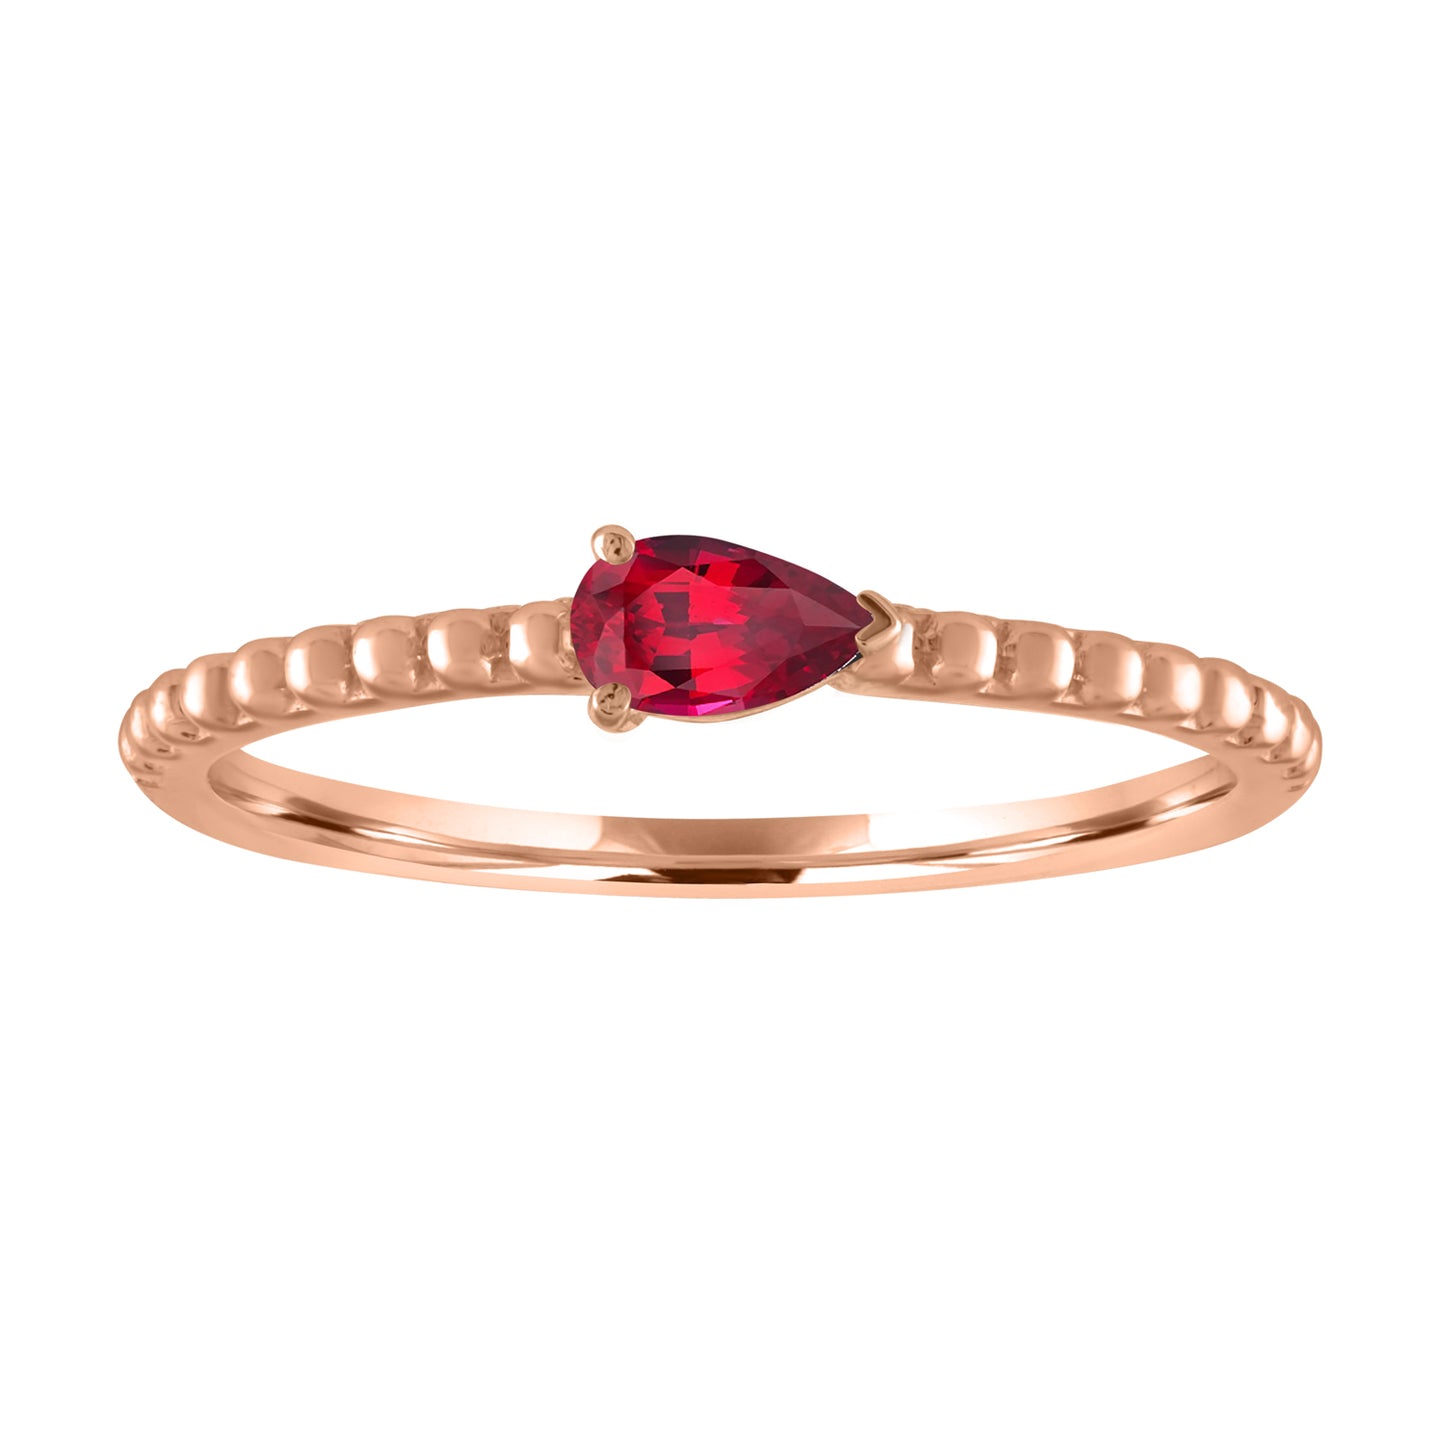 Rose gold beaded skinny band with a pear shaped ruby in the center. 